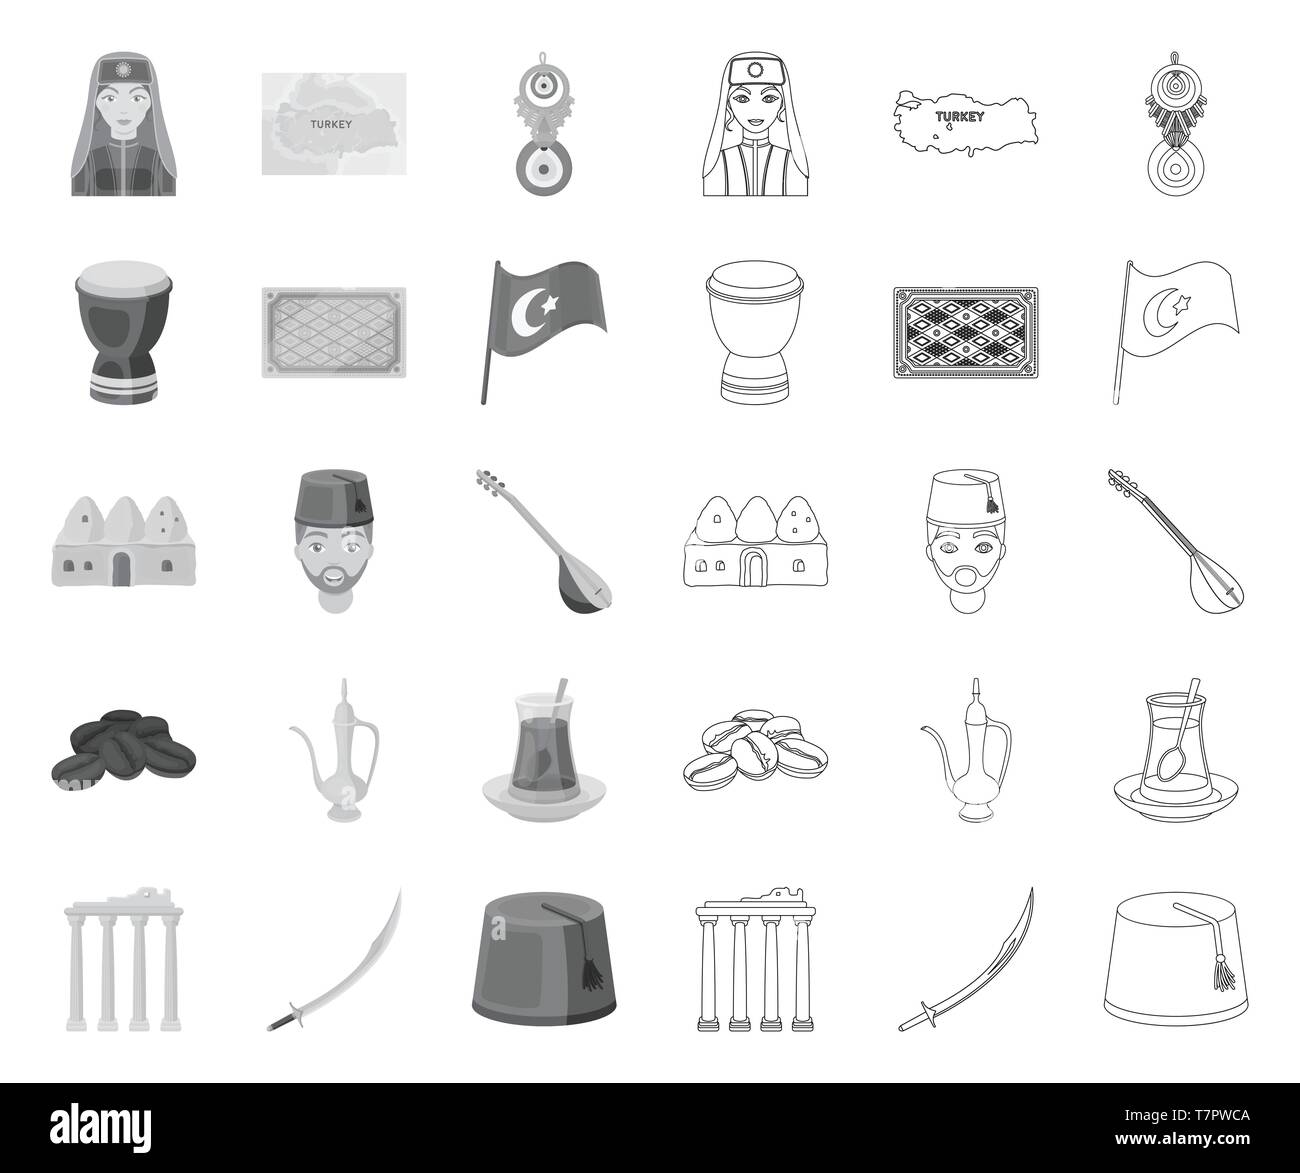 amulet,art,attraction,beans,beehive,carpet,coffee,collection,country,culture,design,drum,fez,flag,goblet,hookah,house,icon,illustration,isolated,journey,jug,kilij,logo,man,mono,outline,nazar,population,ruins,saz,set,showplace,sight,sign,symbol,tea,territory,tourism,traditions,traveling,turkey,turkish,vector,web,woman Vector Vectors , Stock Vector